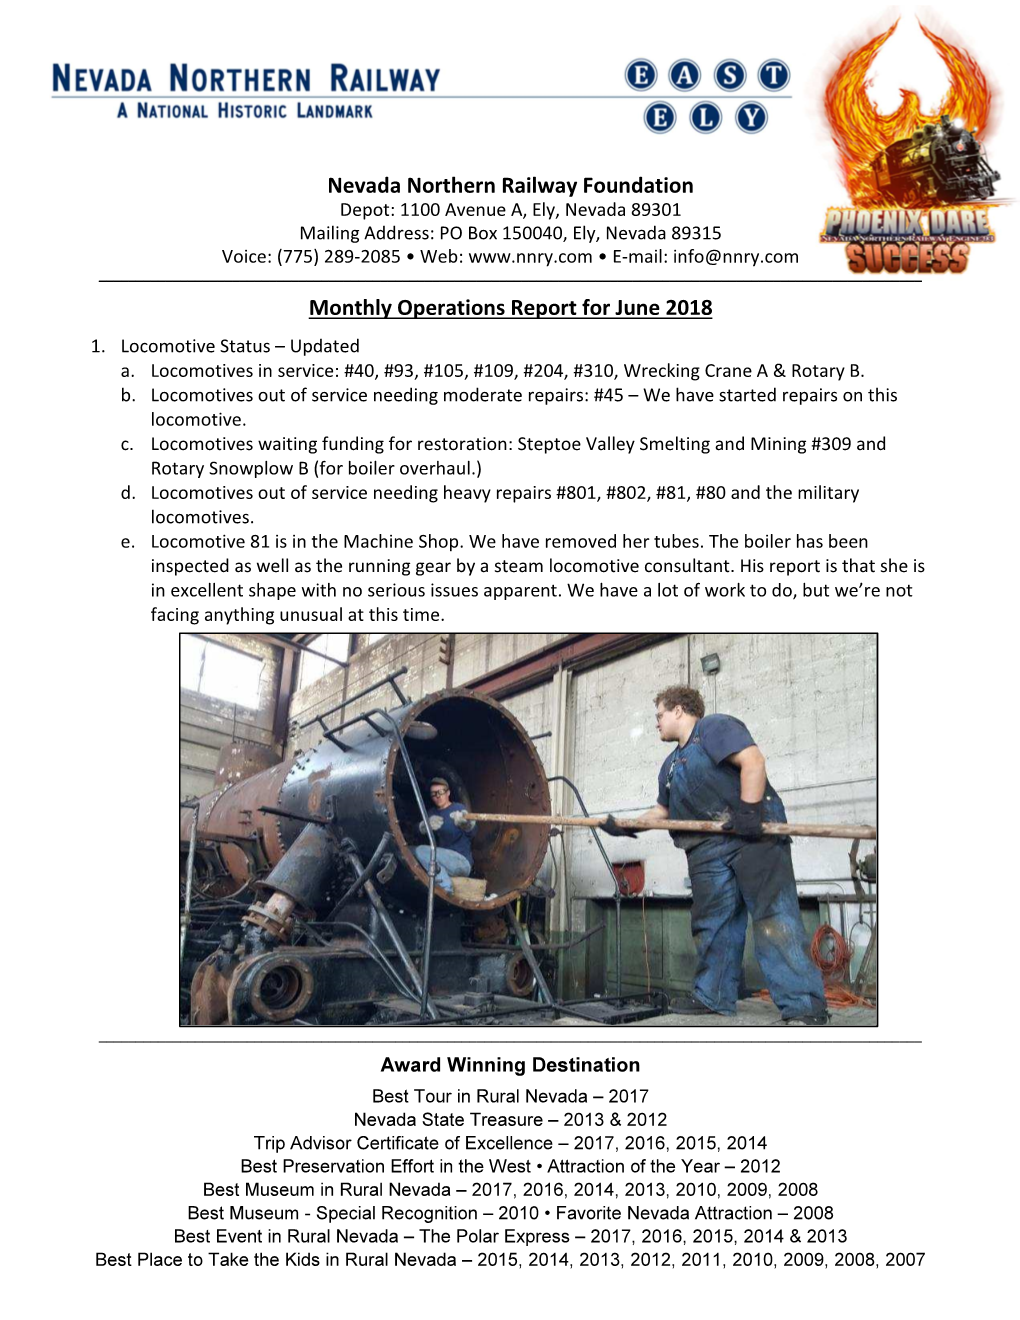 Nevada Northern Railway Foundation Monthly Operations Report for June